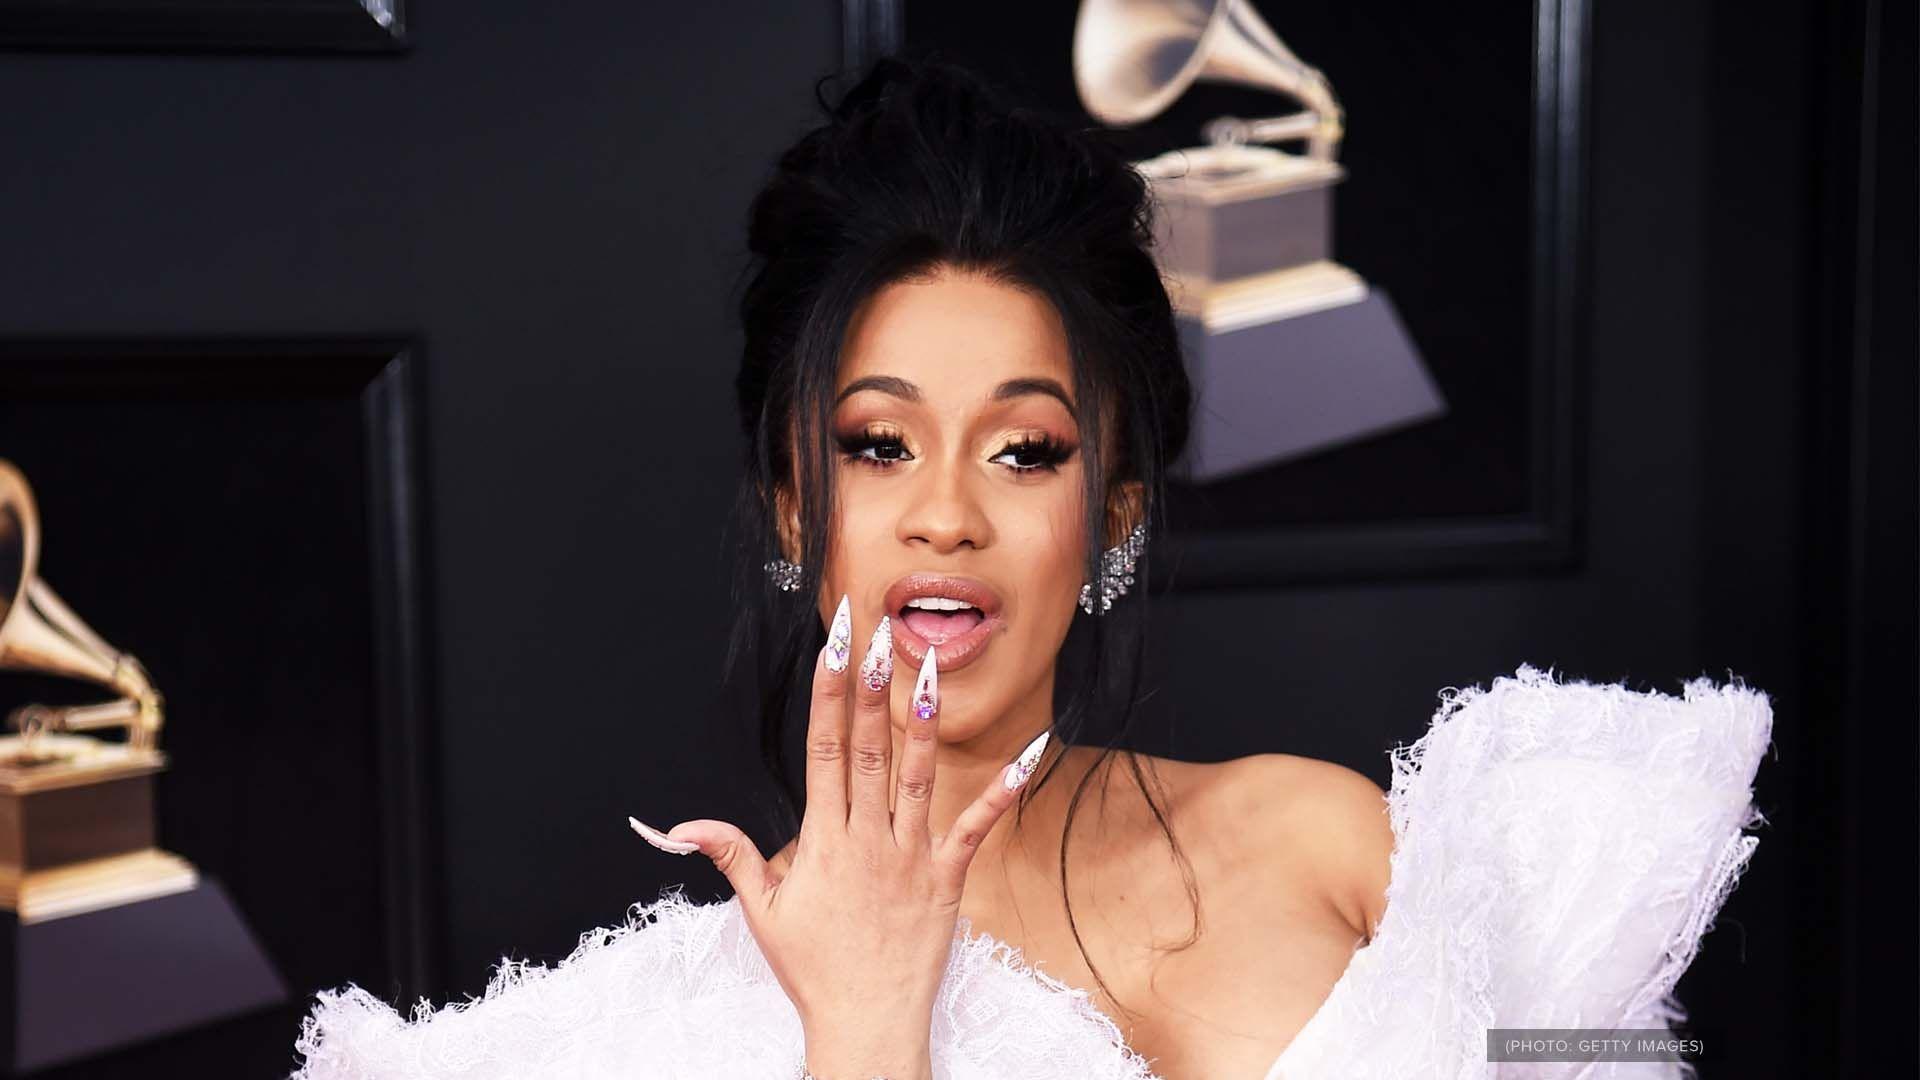 BET Breaks: Could Cardi B Grace The Cover of Vogue?. Video